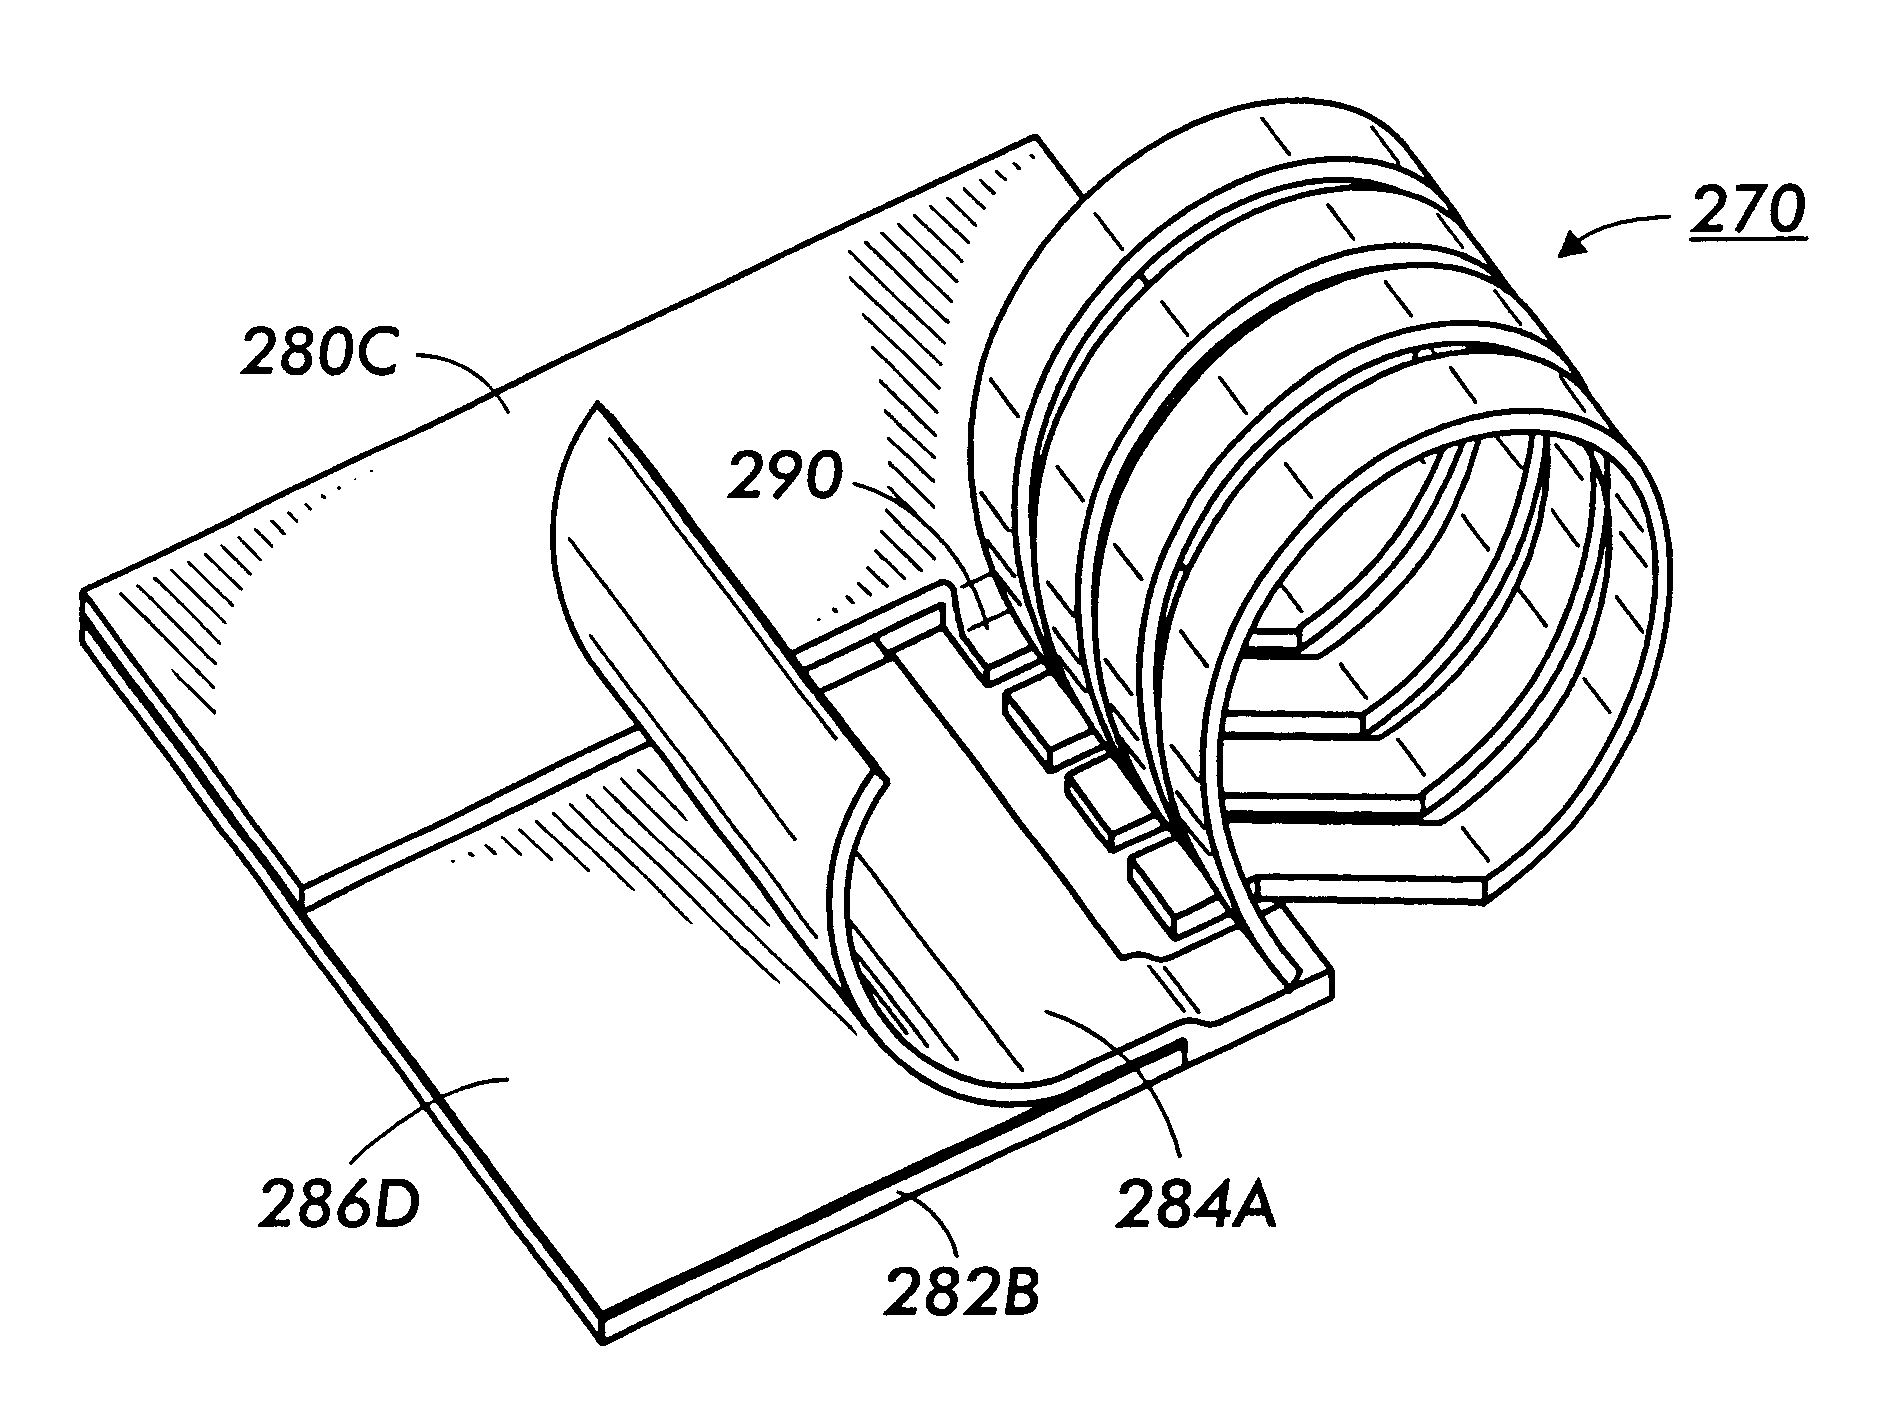 Photolithographically-patterned out-of-plane coil structures and method of making